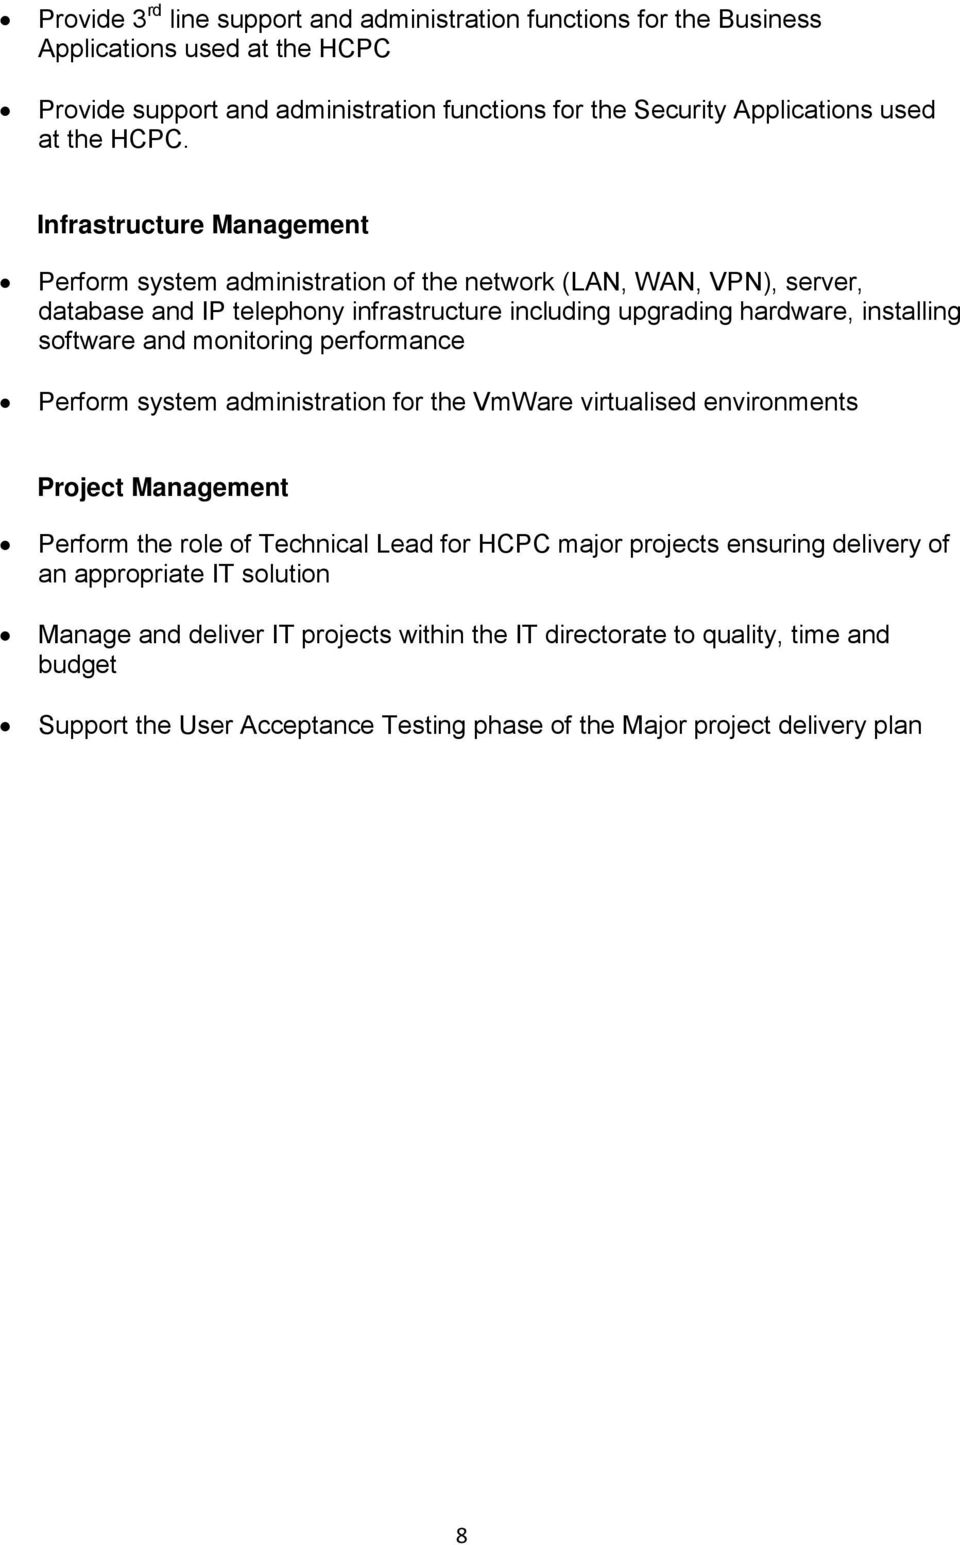 software and monitoring performance Perform system administration for the VmWare virtualised environments Project Management Perform the role of Technical Lead for HCPC major projects